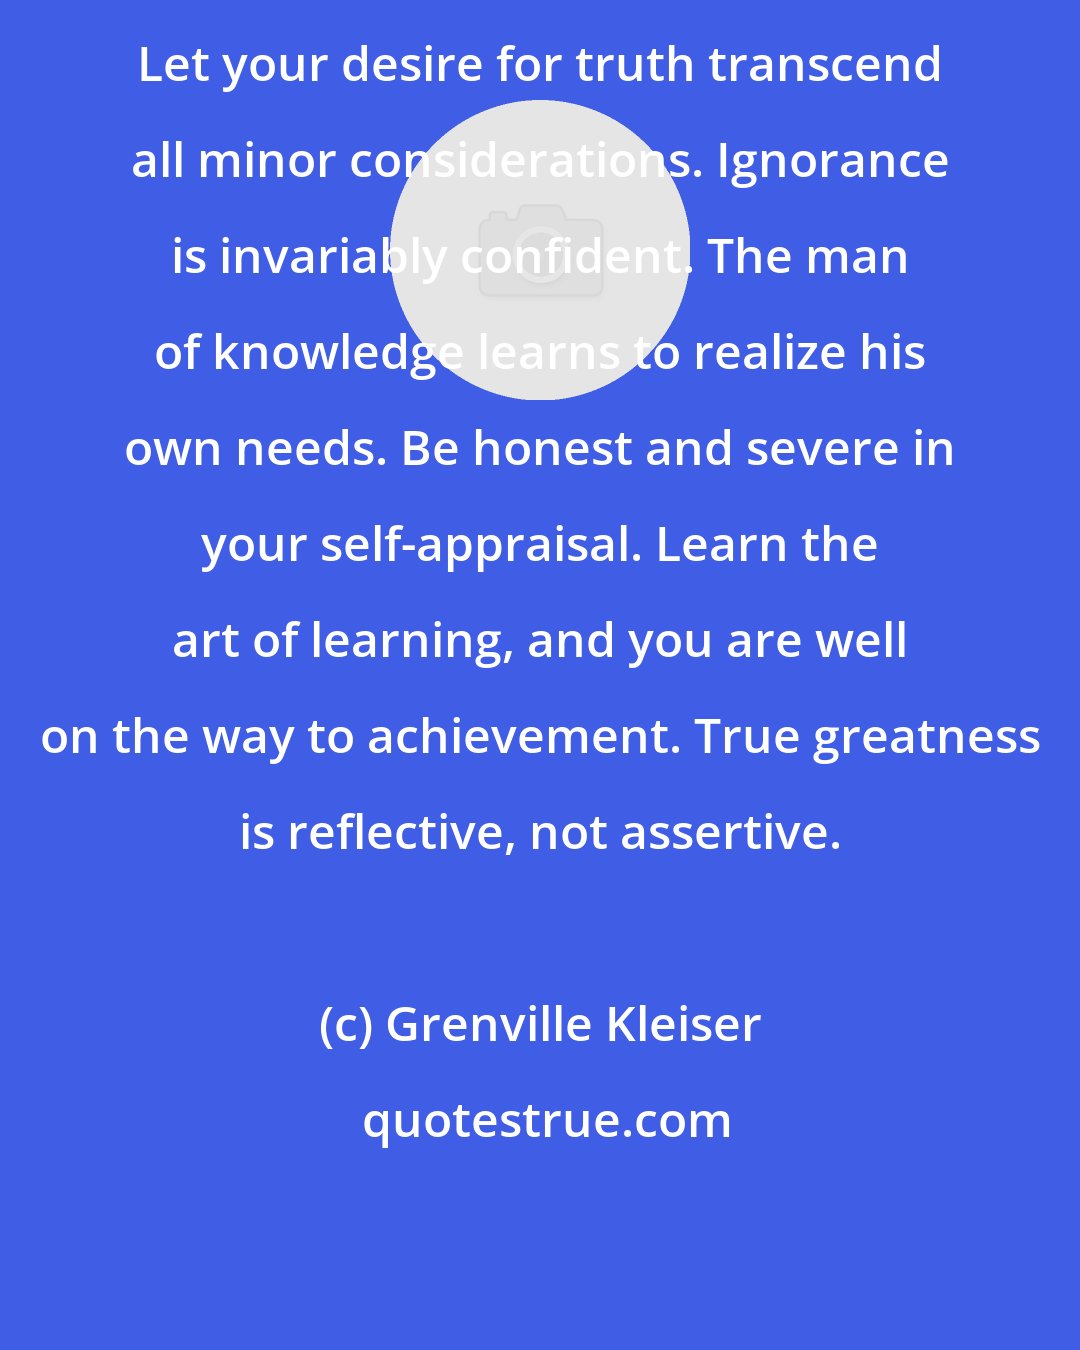 Grenville Kleiser: Let your desire for truth transcend all minor considerations. Ignorance is invariably confident. The man of knowledge learns to realize his own needs. Be honest and severe in your self-appraisal. Learn the art of learning, and you are well on the way to achievement. True greatness is reflective, not assertive.